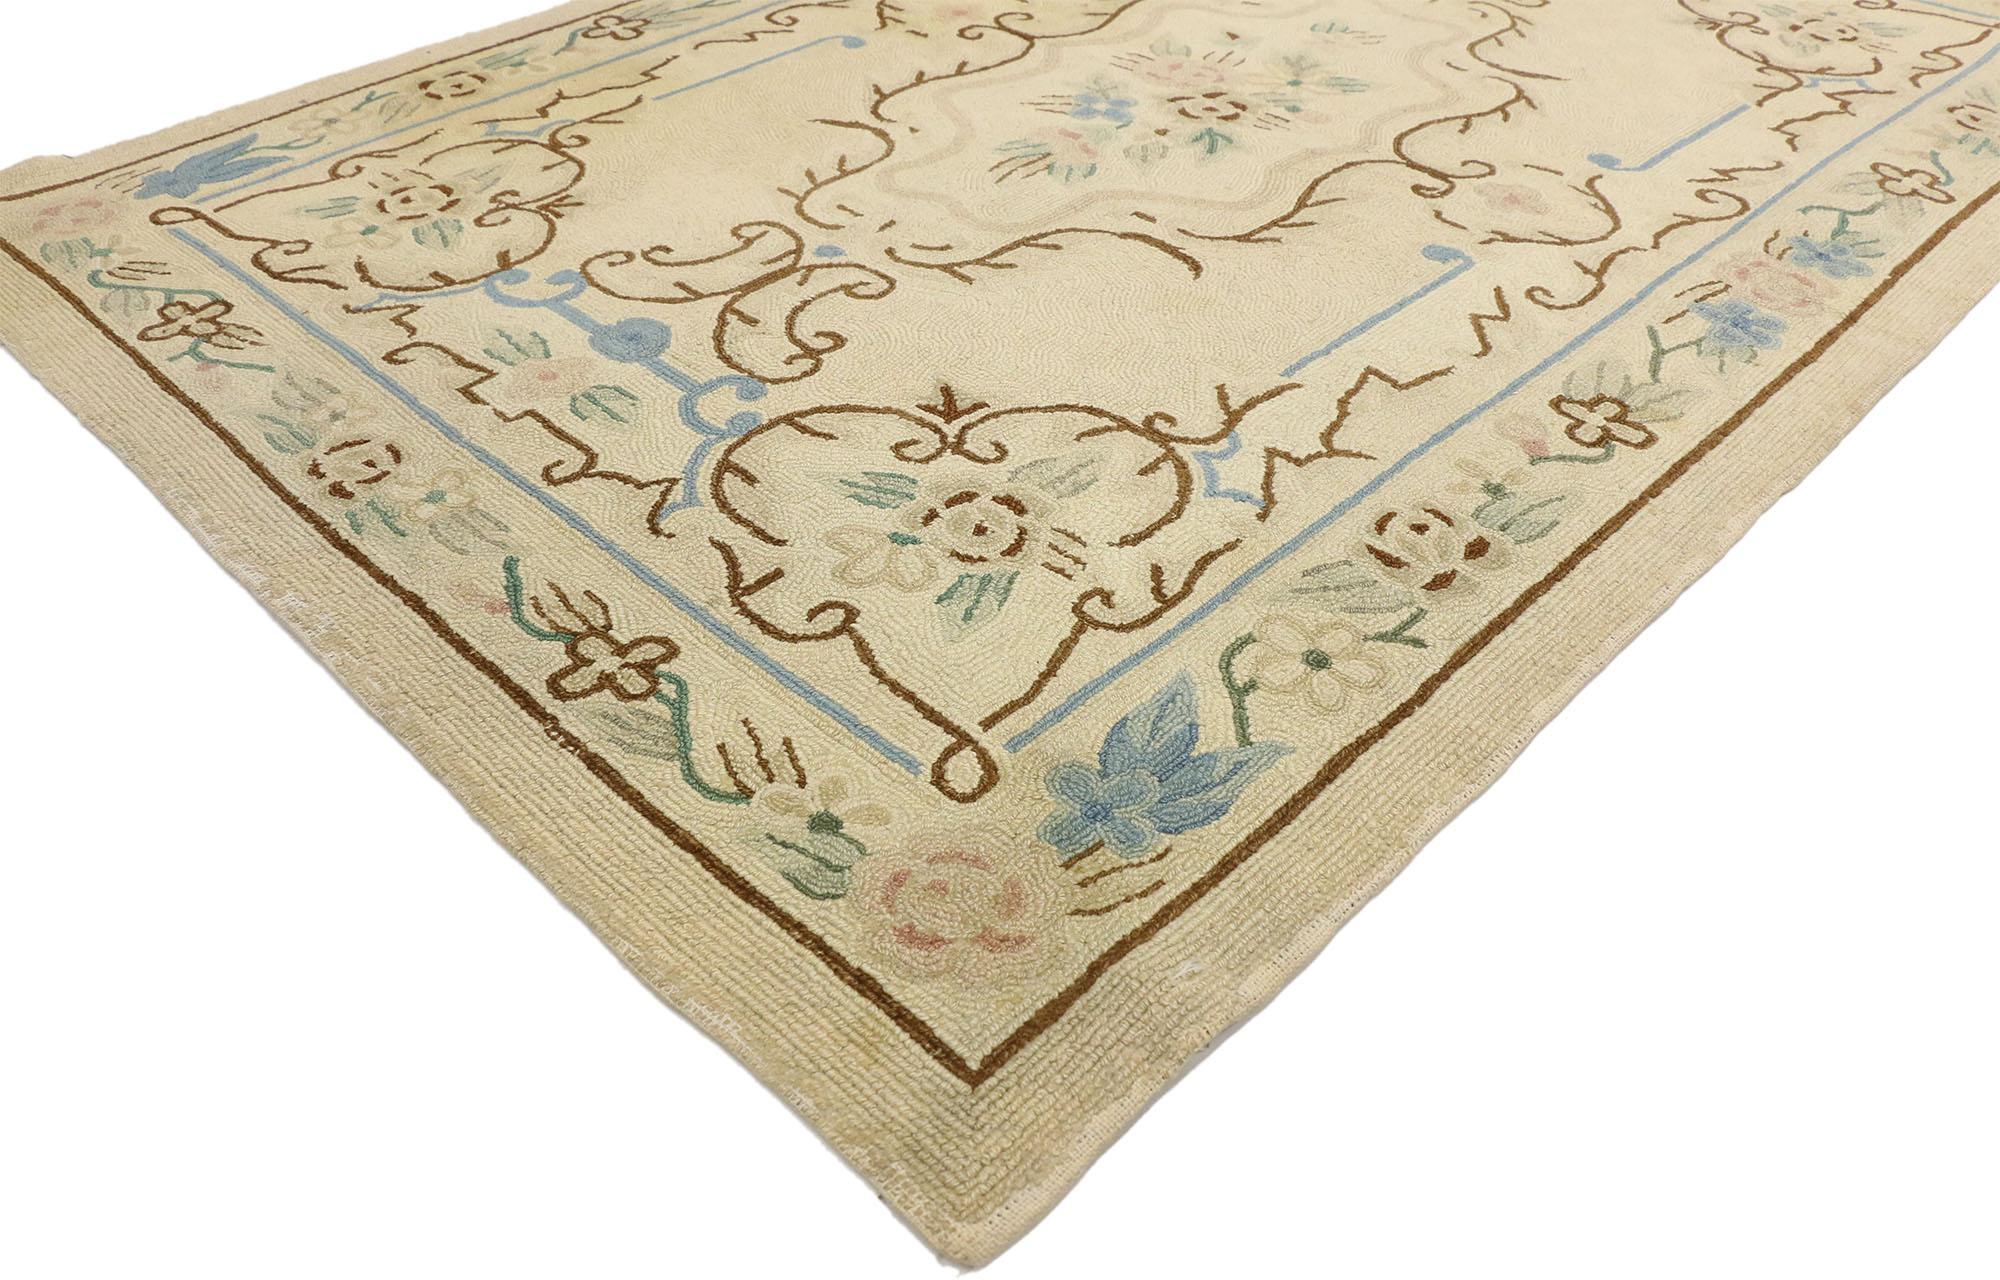 70861 Vintage Chinese Aubusson Floral Hooked Rug, 04'01 x 05'10. Vintage Chinese floral hooked rugs with Aubusson design are captivating decorative pieces that blend traditional Chinese artistry with the sophisticated elegance of the renowned French